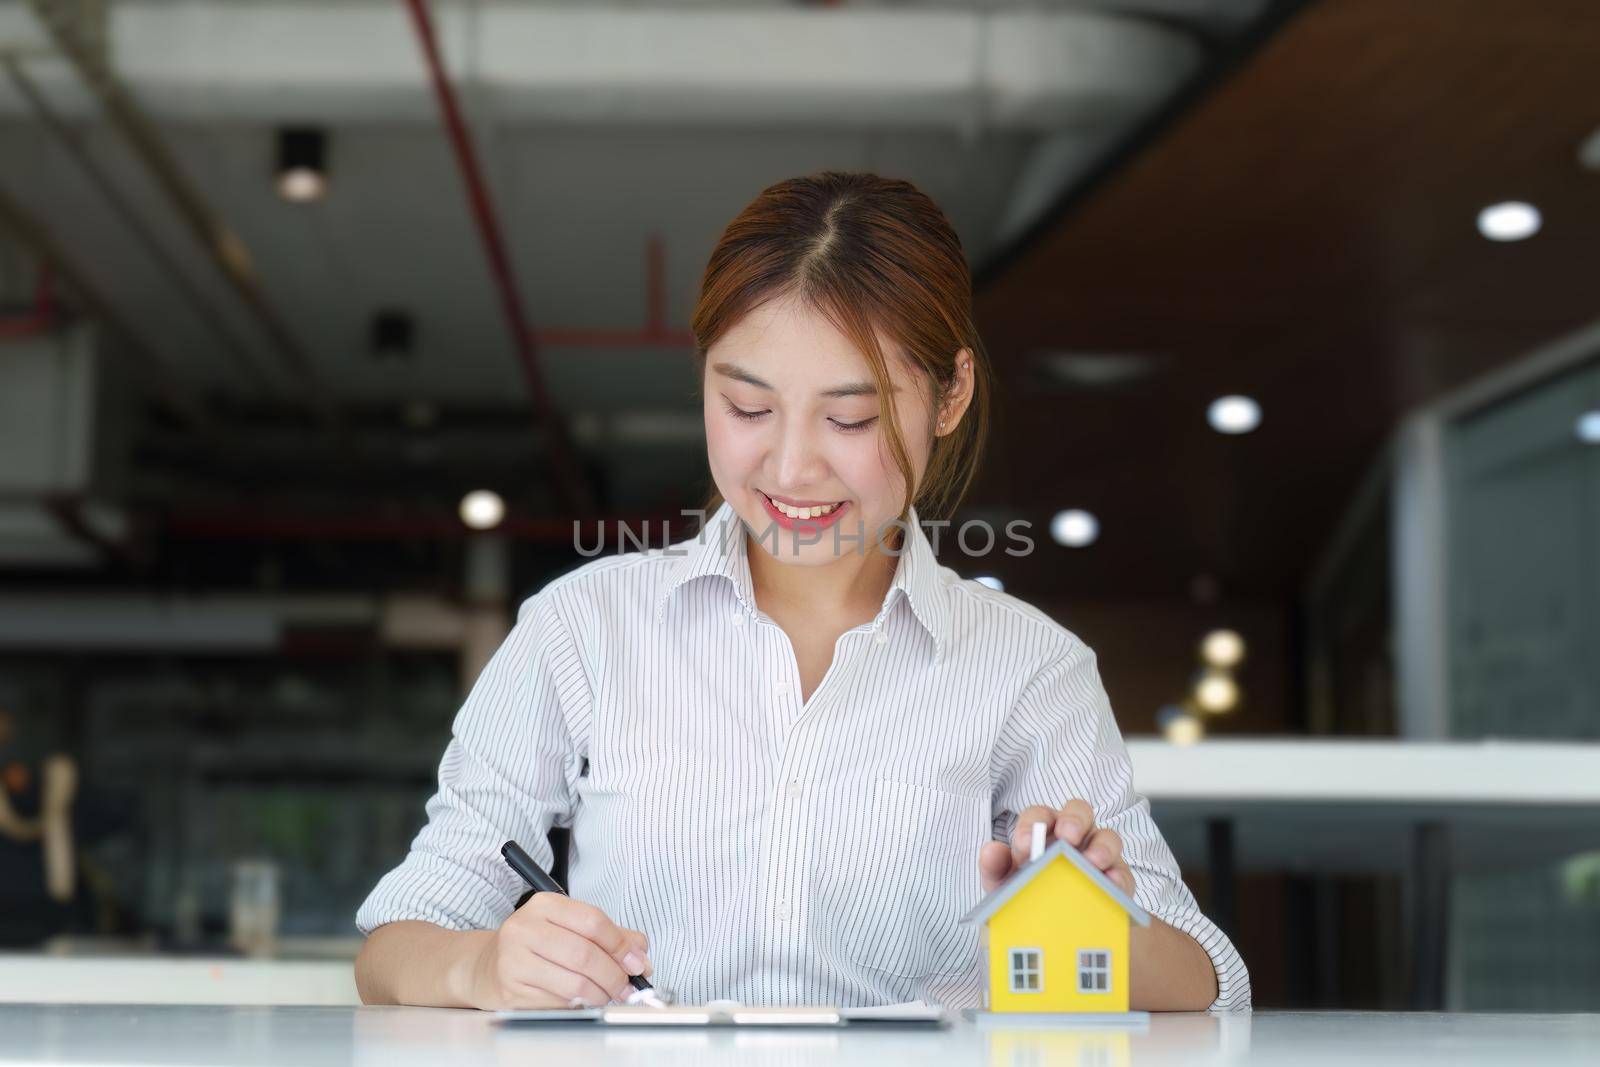 Guarantee, Mortgage, agreement, contract, Signing, Male client holding pen to reading agreement document to sign land loan with real estate agent or bank officer